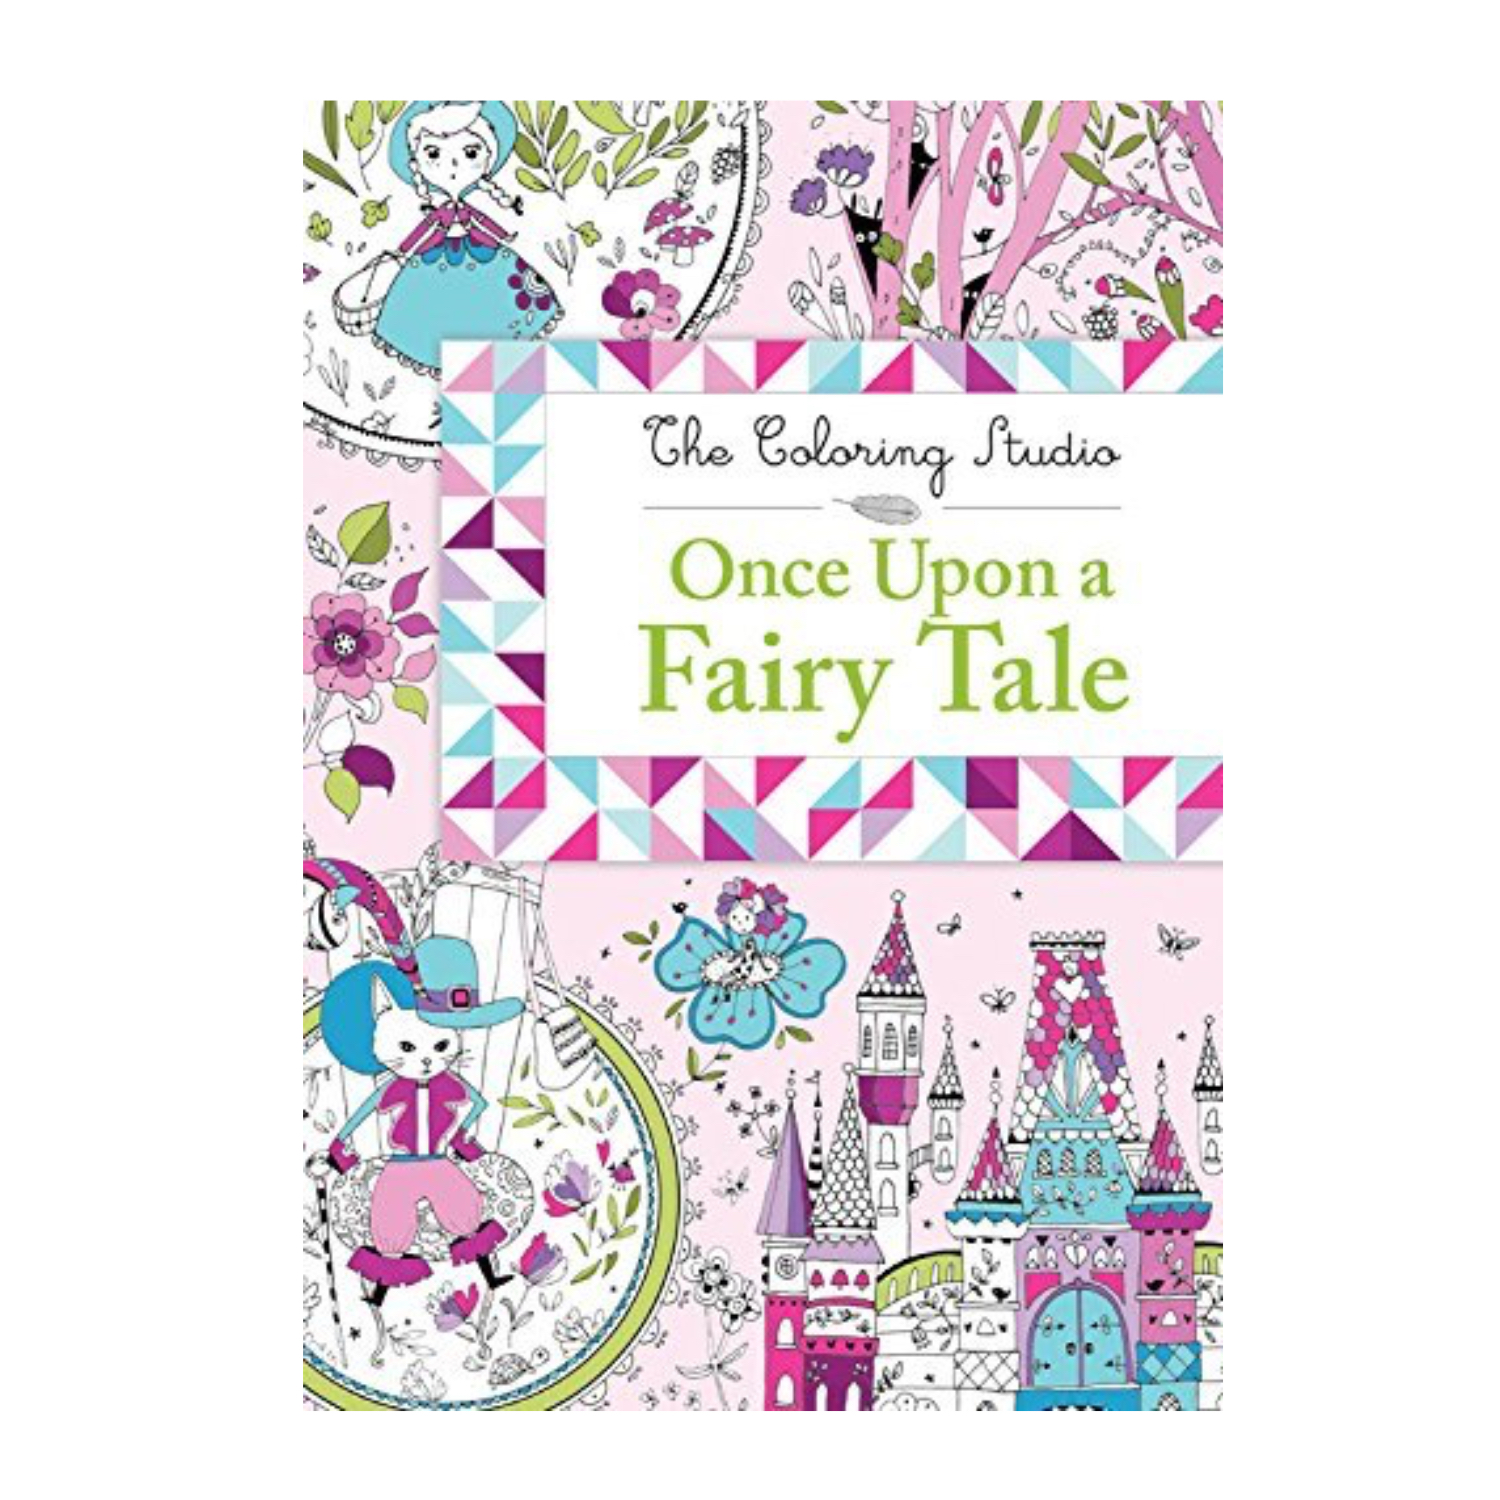 Coloring Book, Once Upon a Fairy Tale by The Coloring Studio